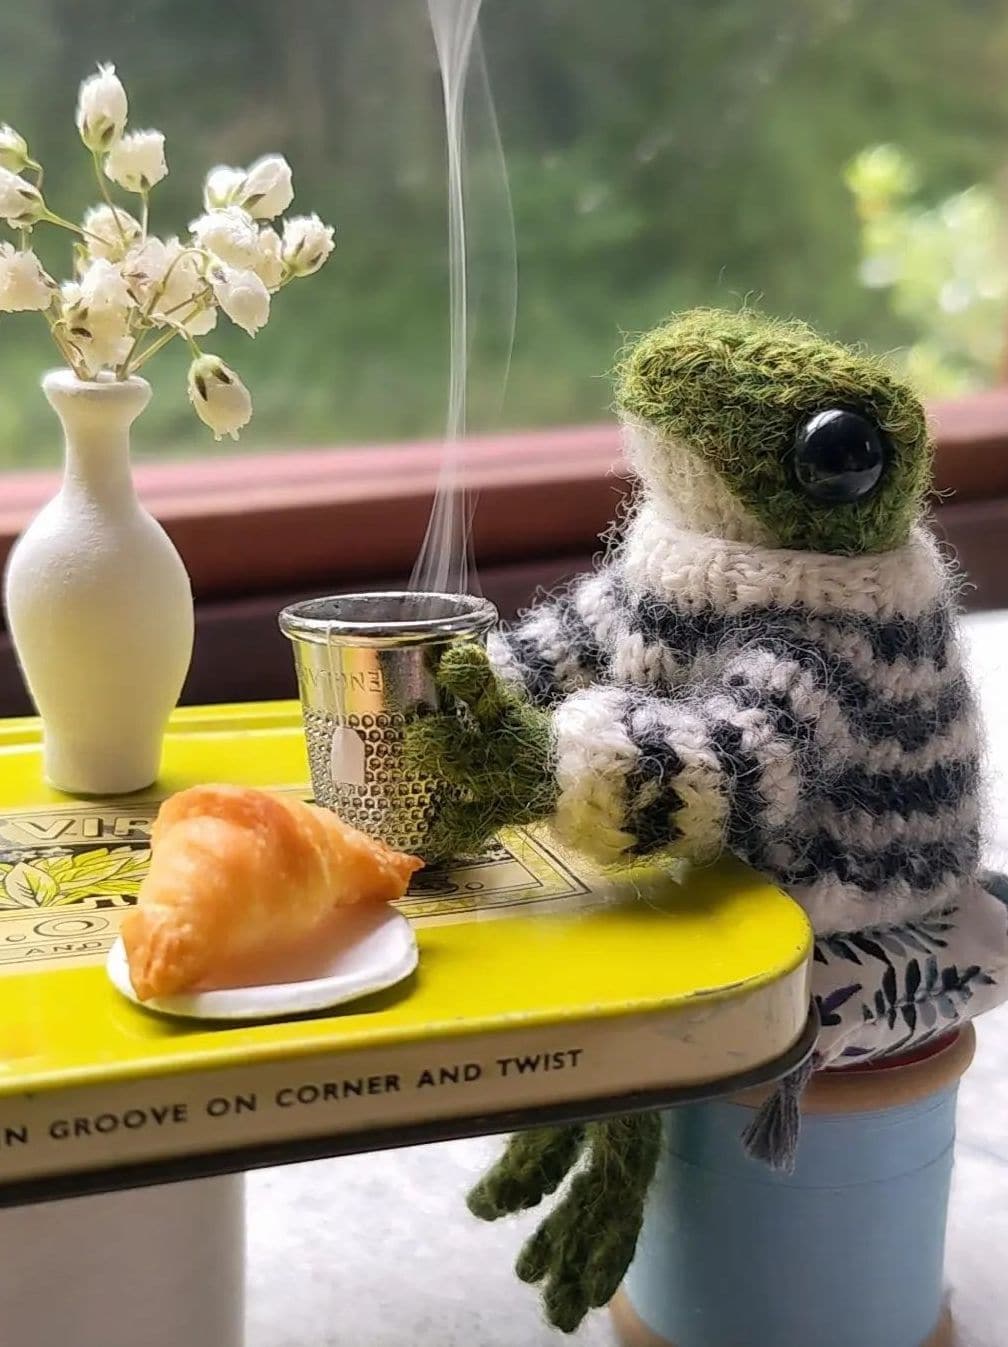 froggy made from dot pebbles knits frog knitting pattern by india rose crawford. I've shared all the info you need to get the pattern and make one too - as well as THE most adorable little videos of Froggy by India Rose. Hope you enjoy and happy knitting! x